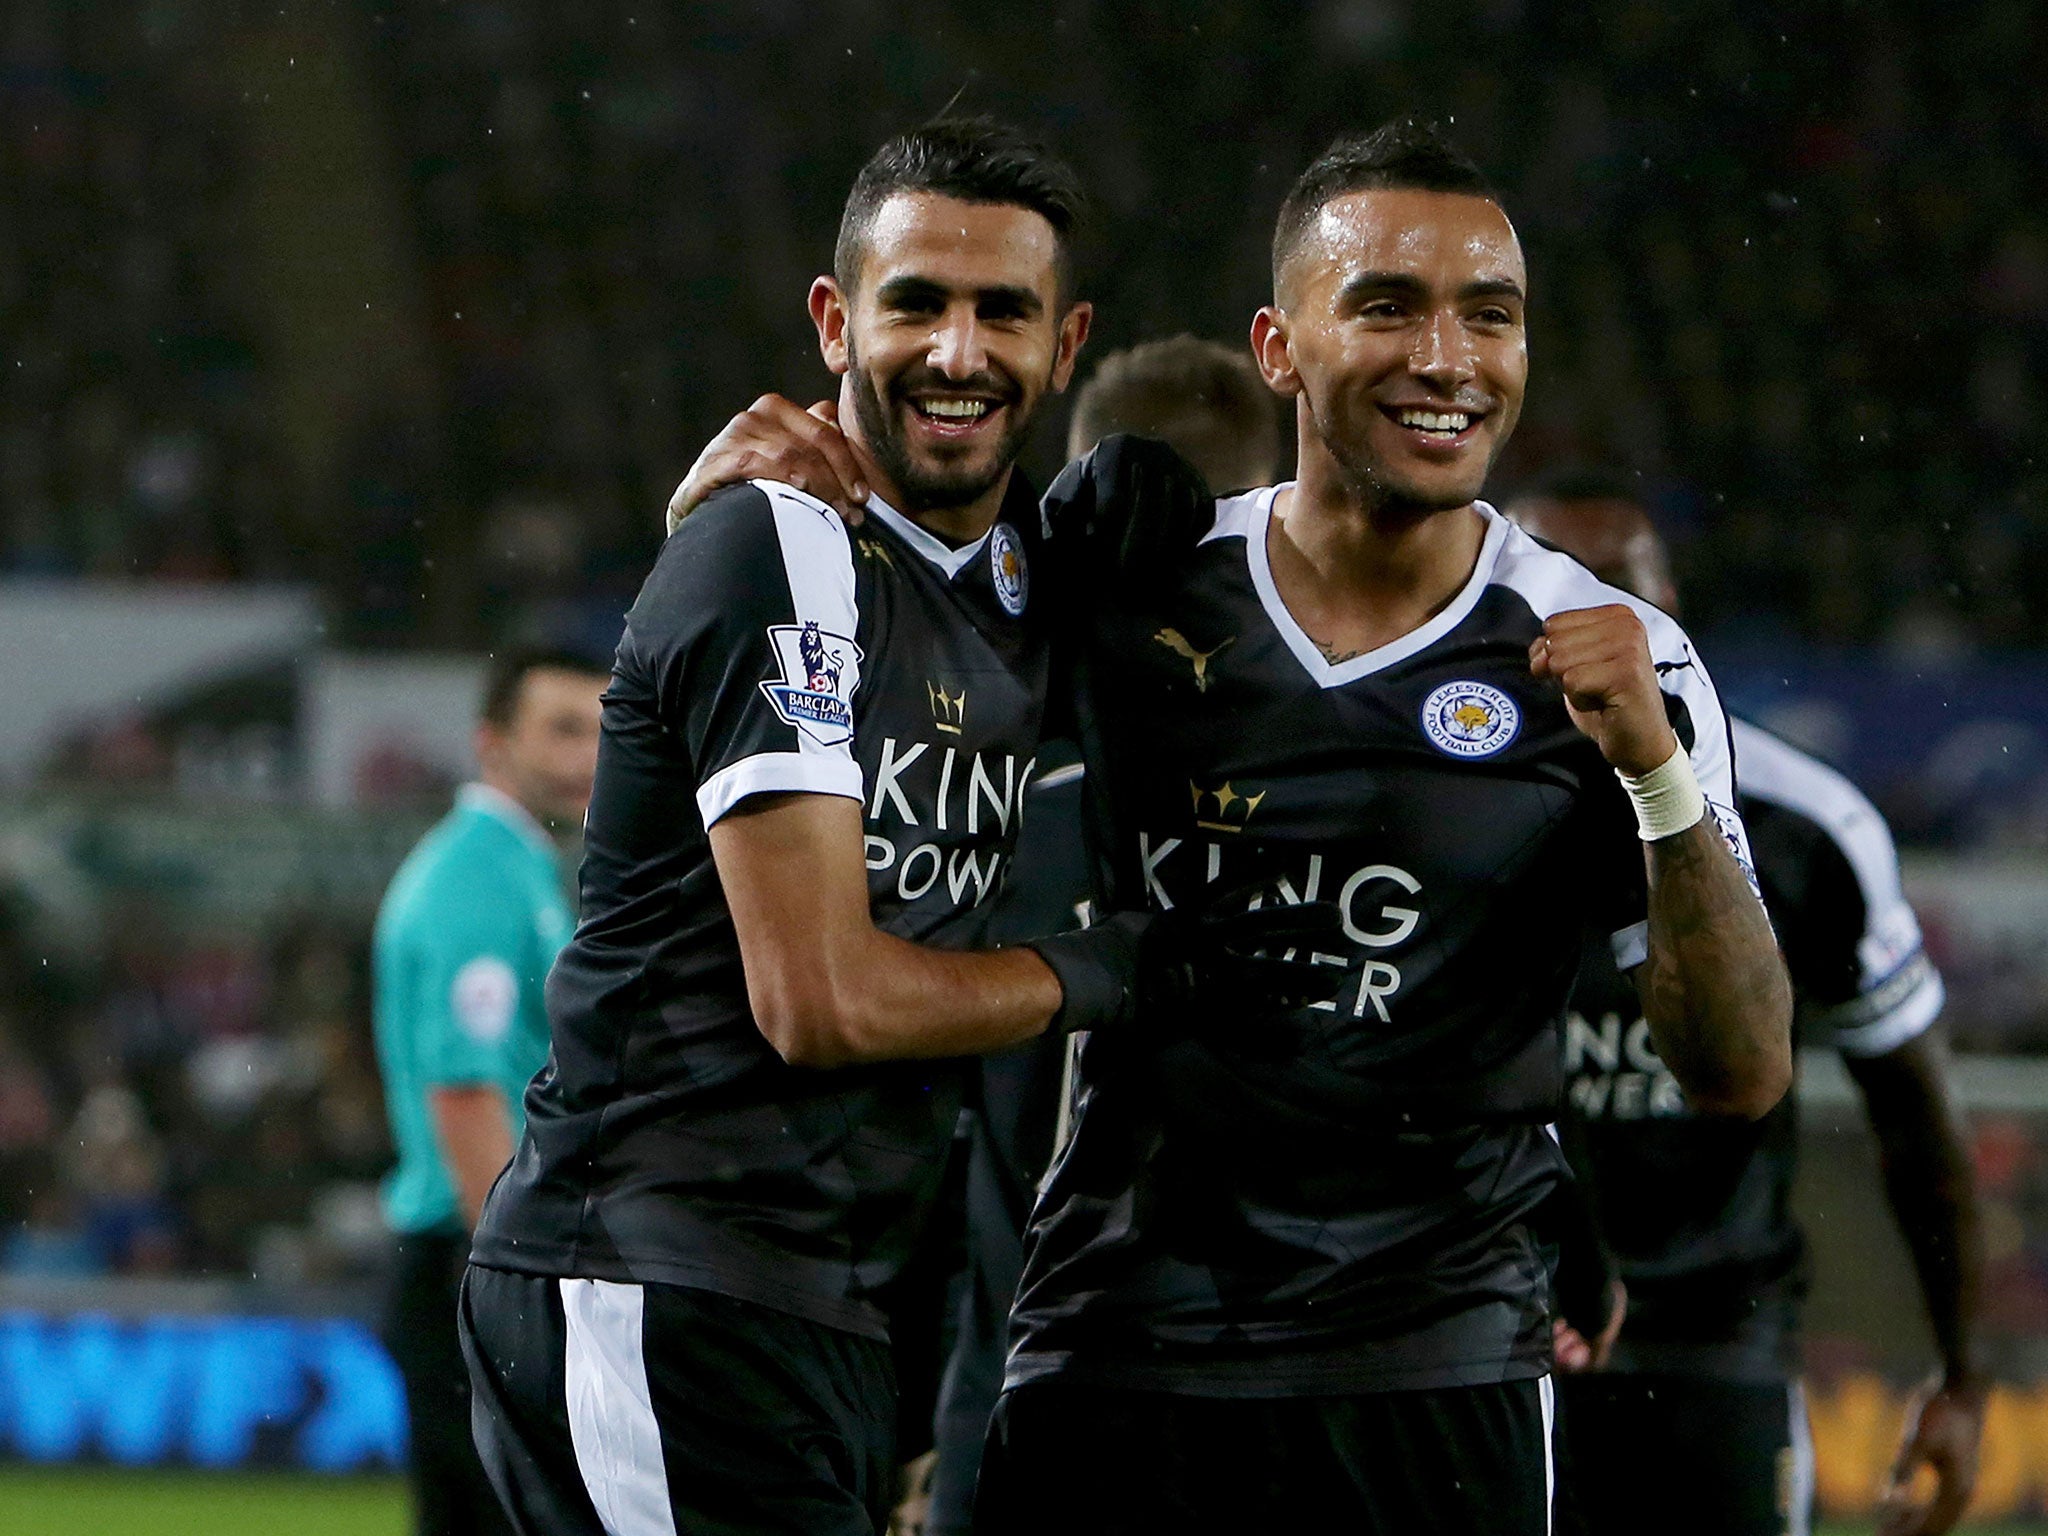 Riyad Mahrez celebrates with Leicester team-mate Danny Simpson after scoring a hat-trick against Swansea